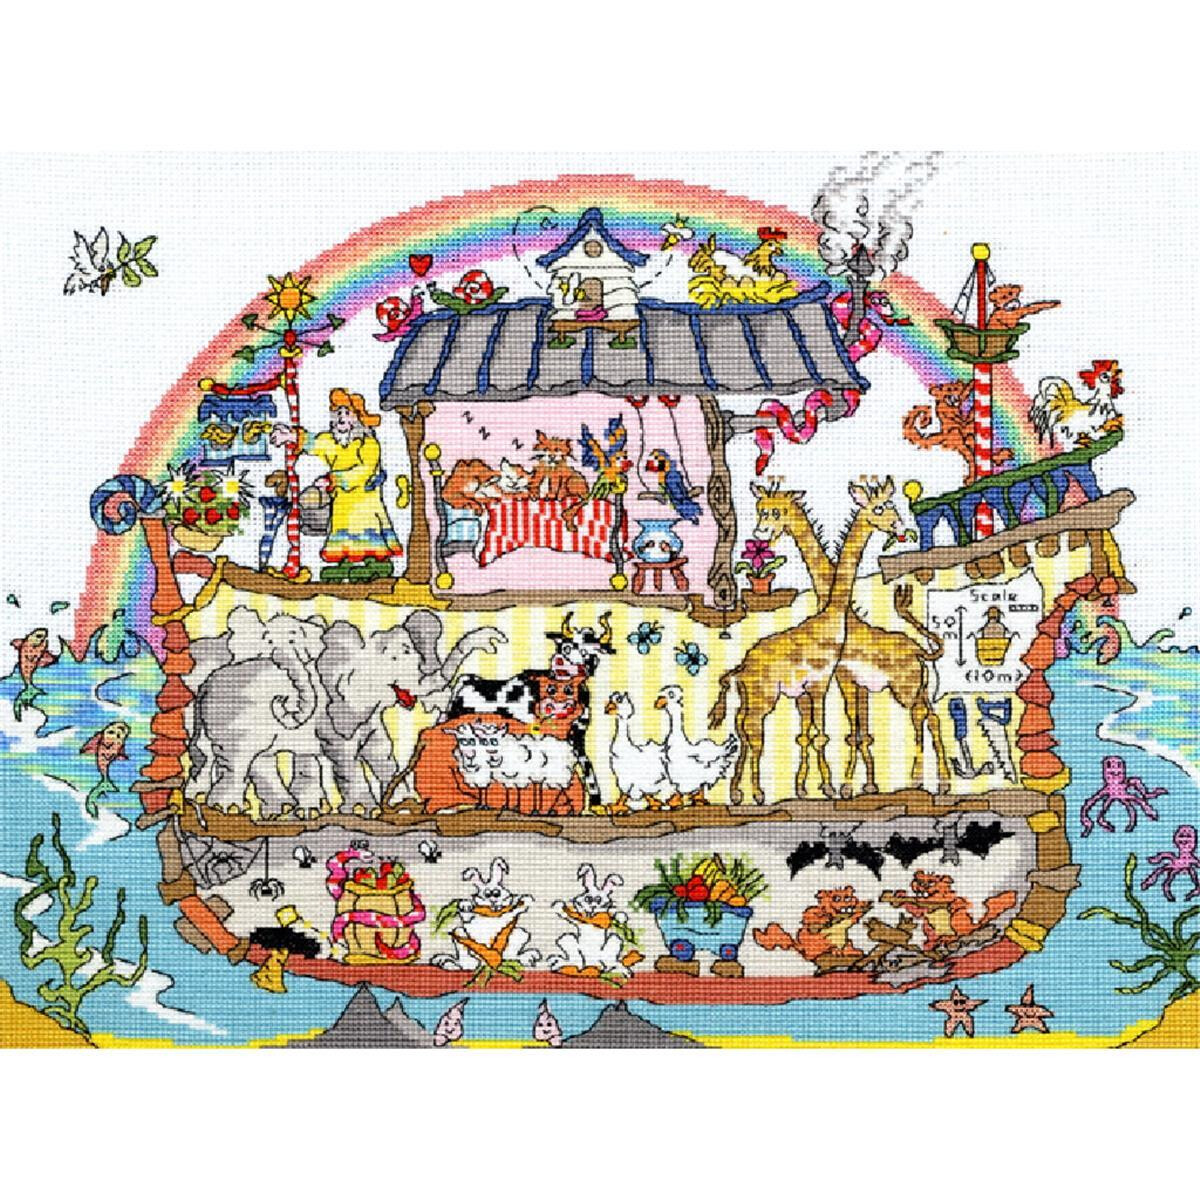 A colorful illustration of Noahs Ark with various...